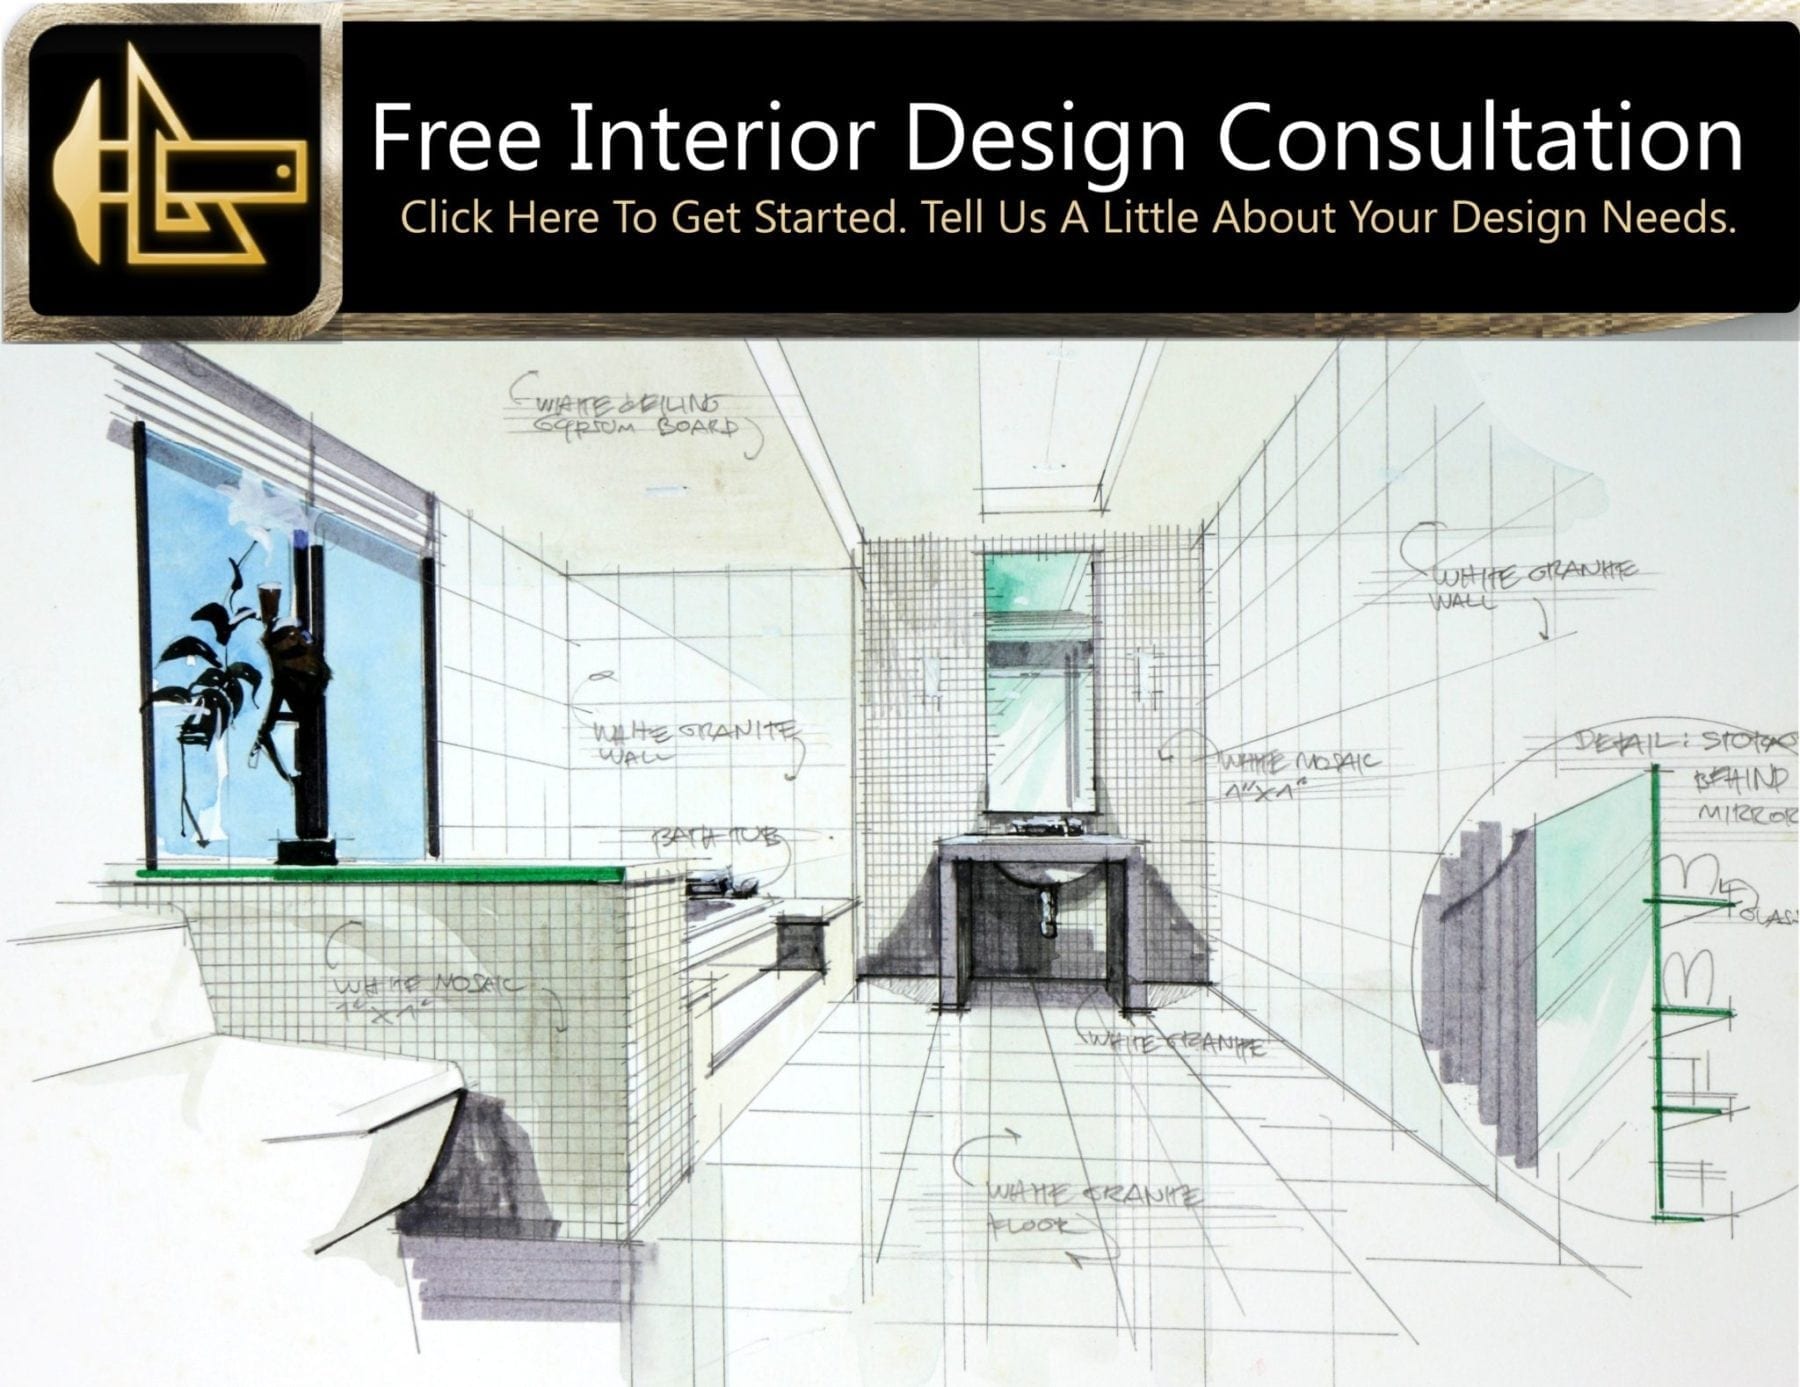 Start Your Home Improvement Project with a Complimentary Design Consultation